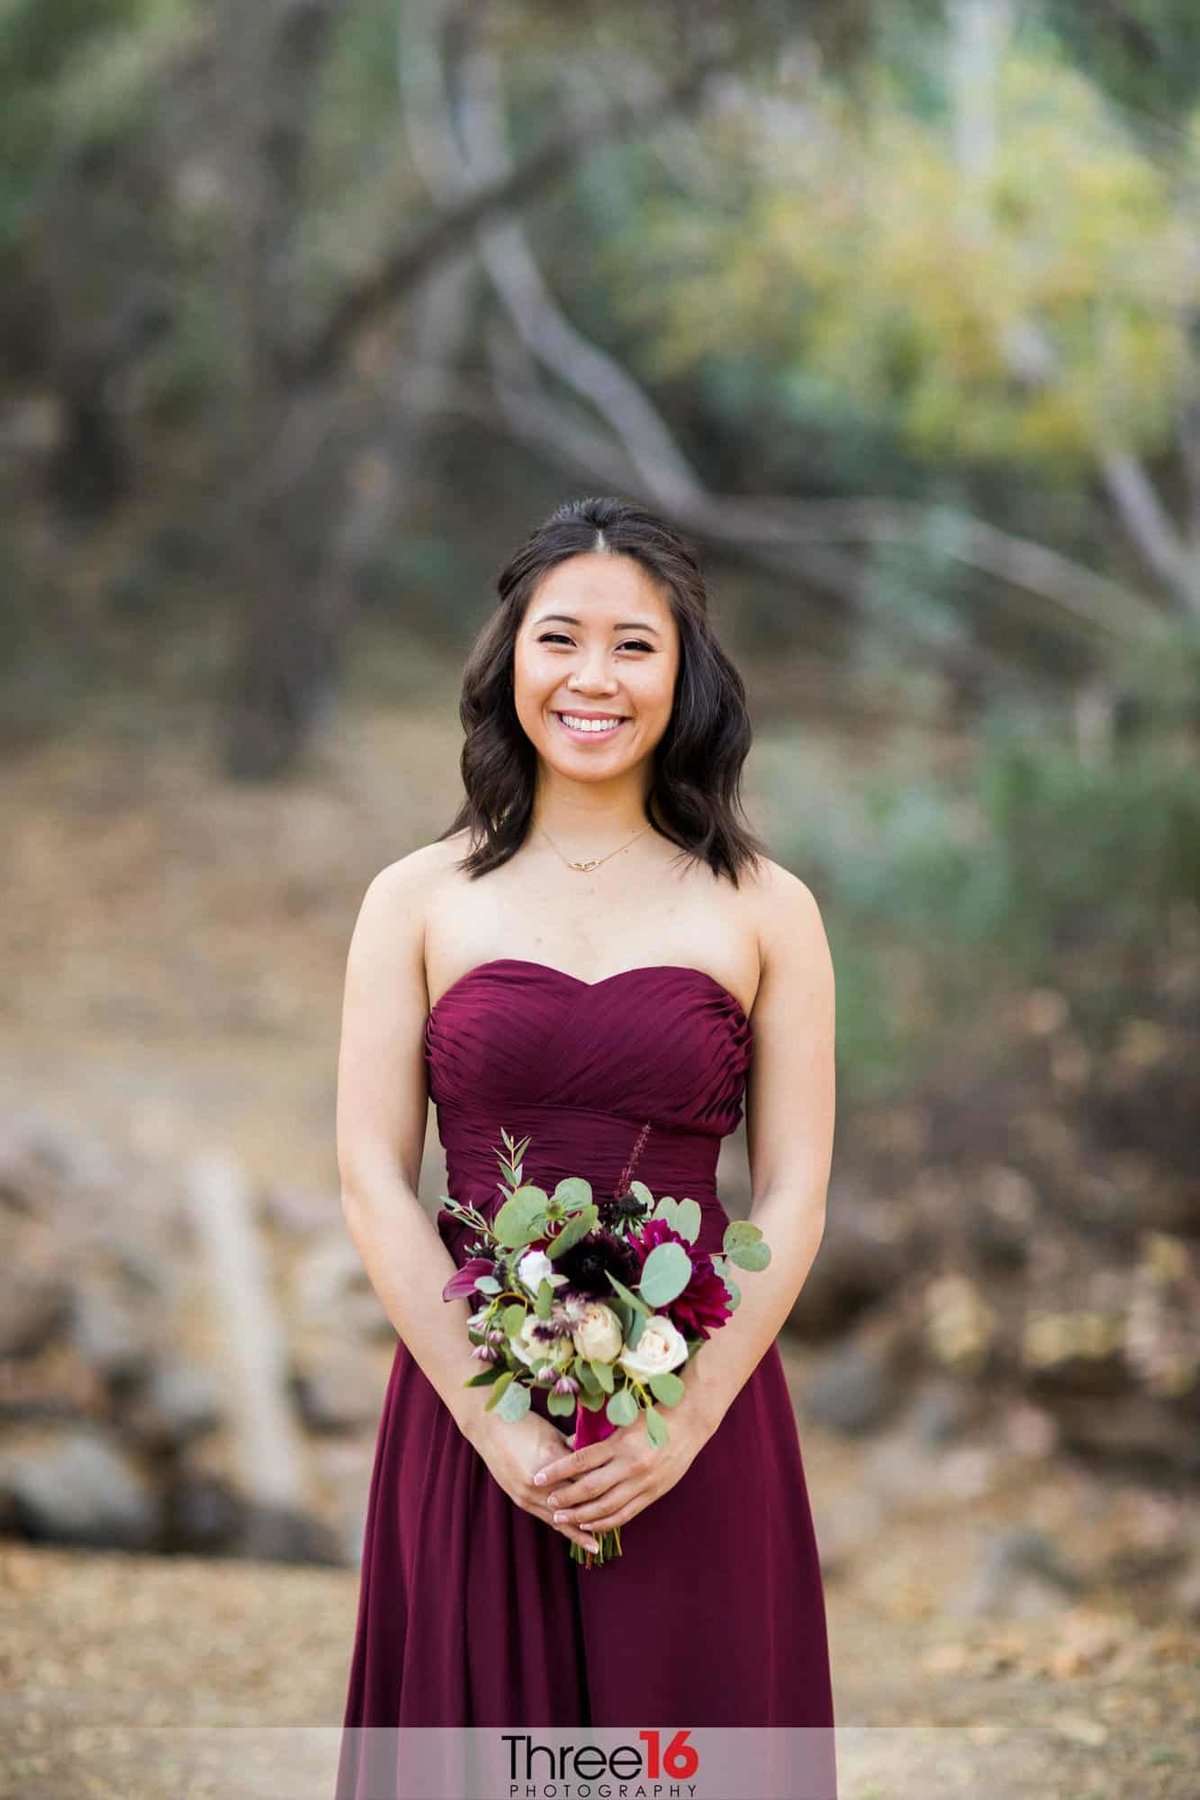 Bridesmaid poses in her burgundy dress and bouquet of flowers